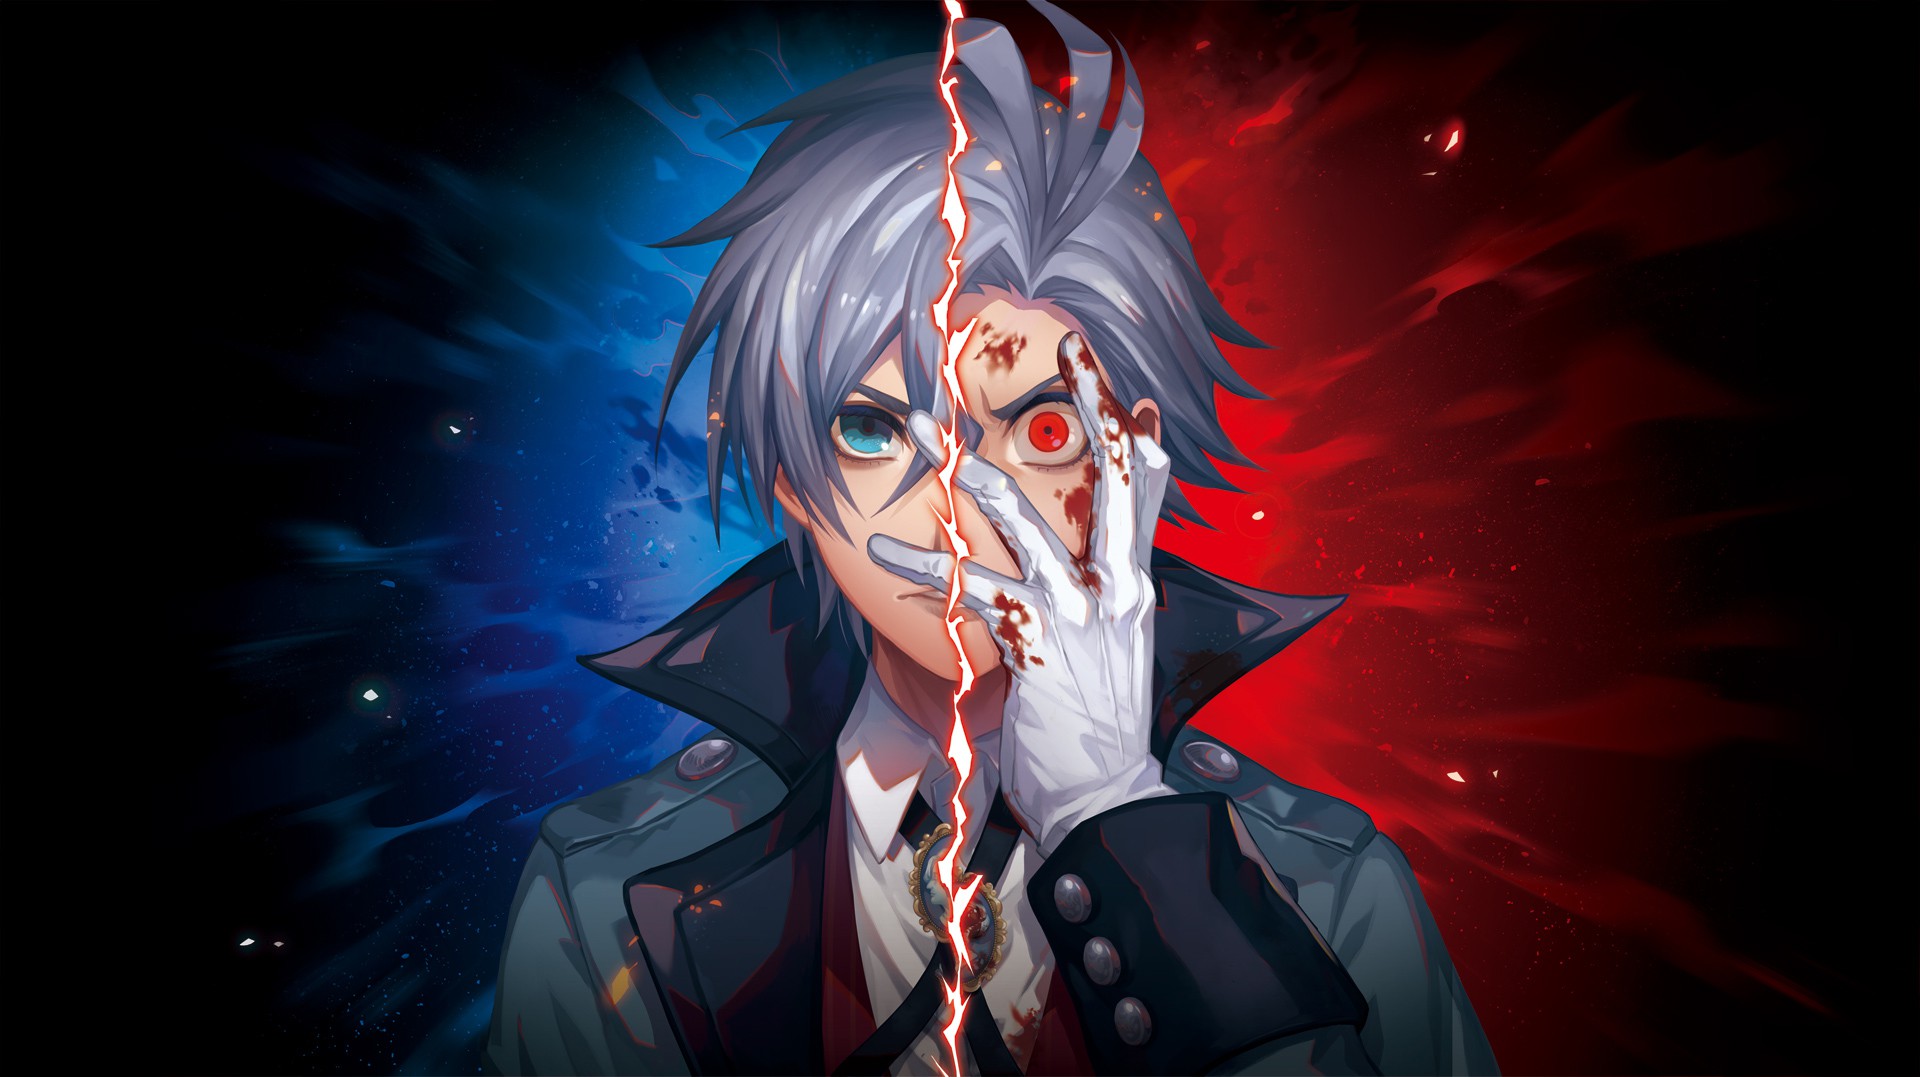 Nippon Ichi Announces New Visual Novel Where You Control a Split-Personality Jack the Ripper